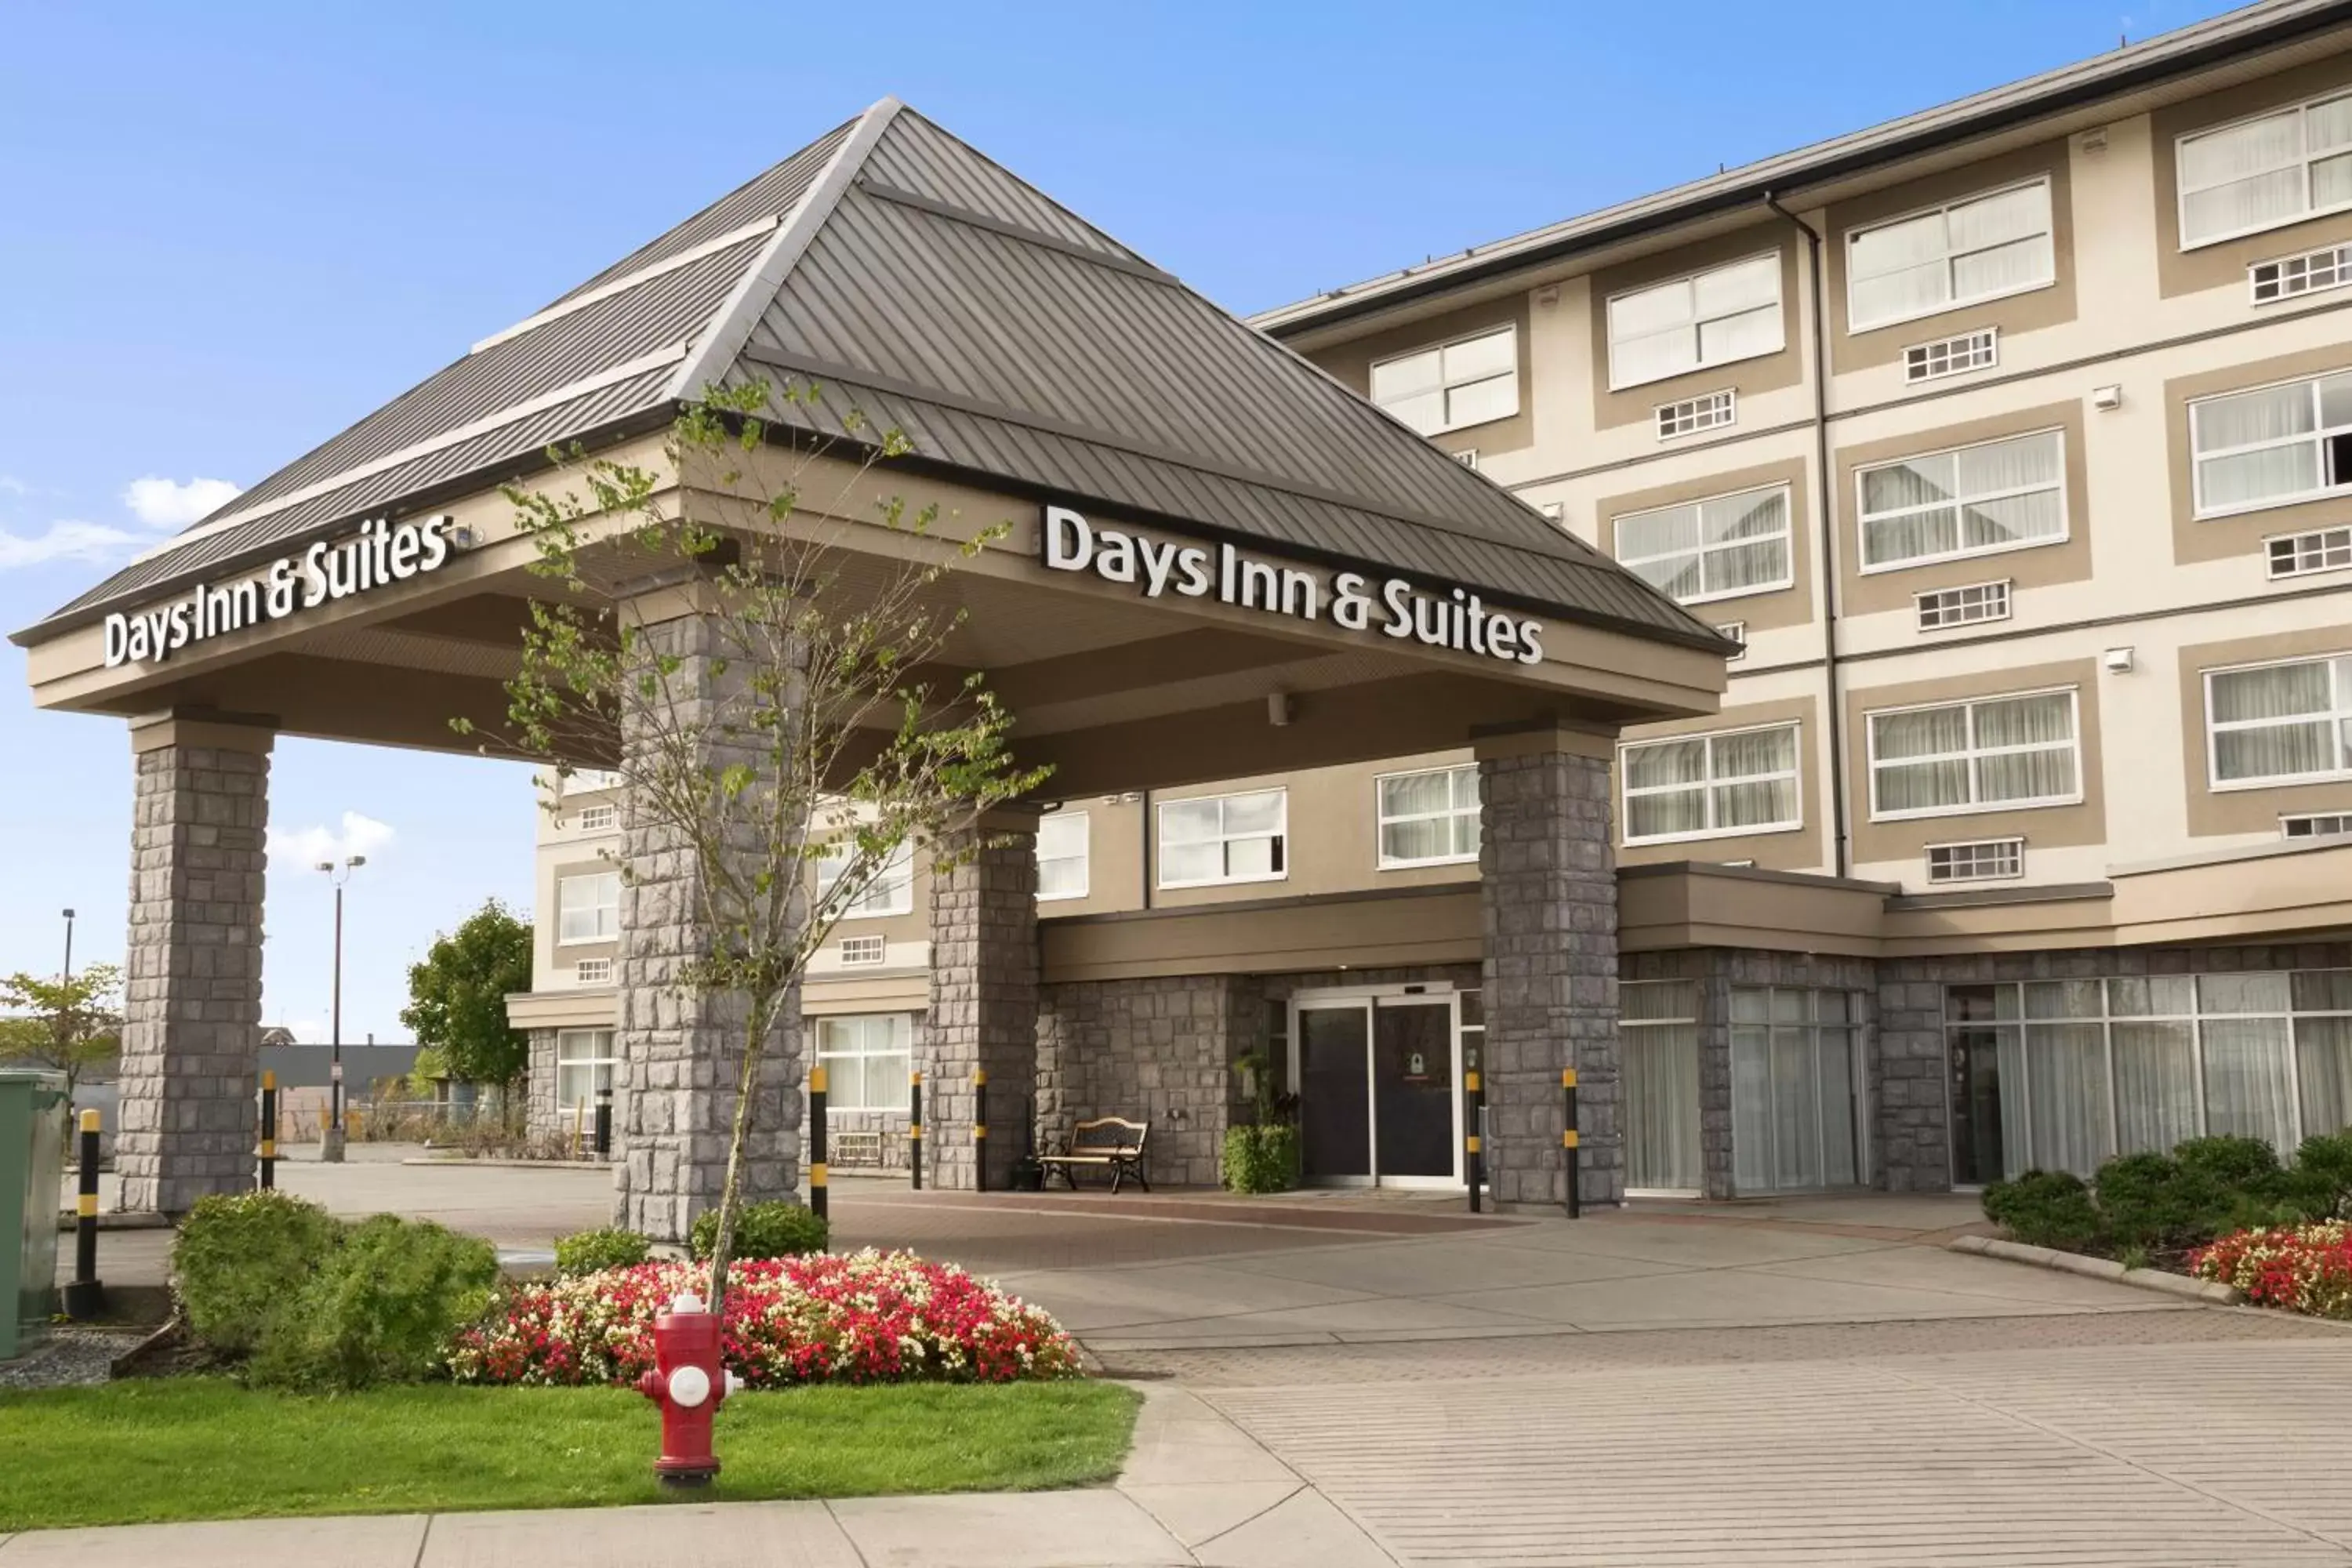 Facade/entrance, Property Building in Days Inn & Suites by Wyndham Langley